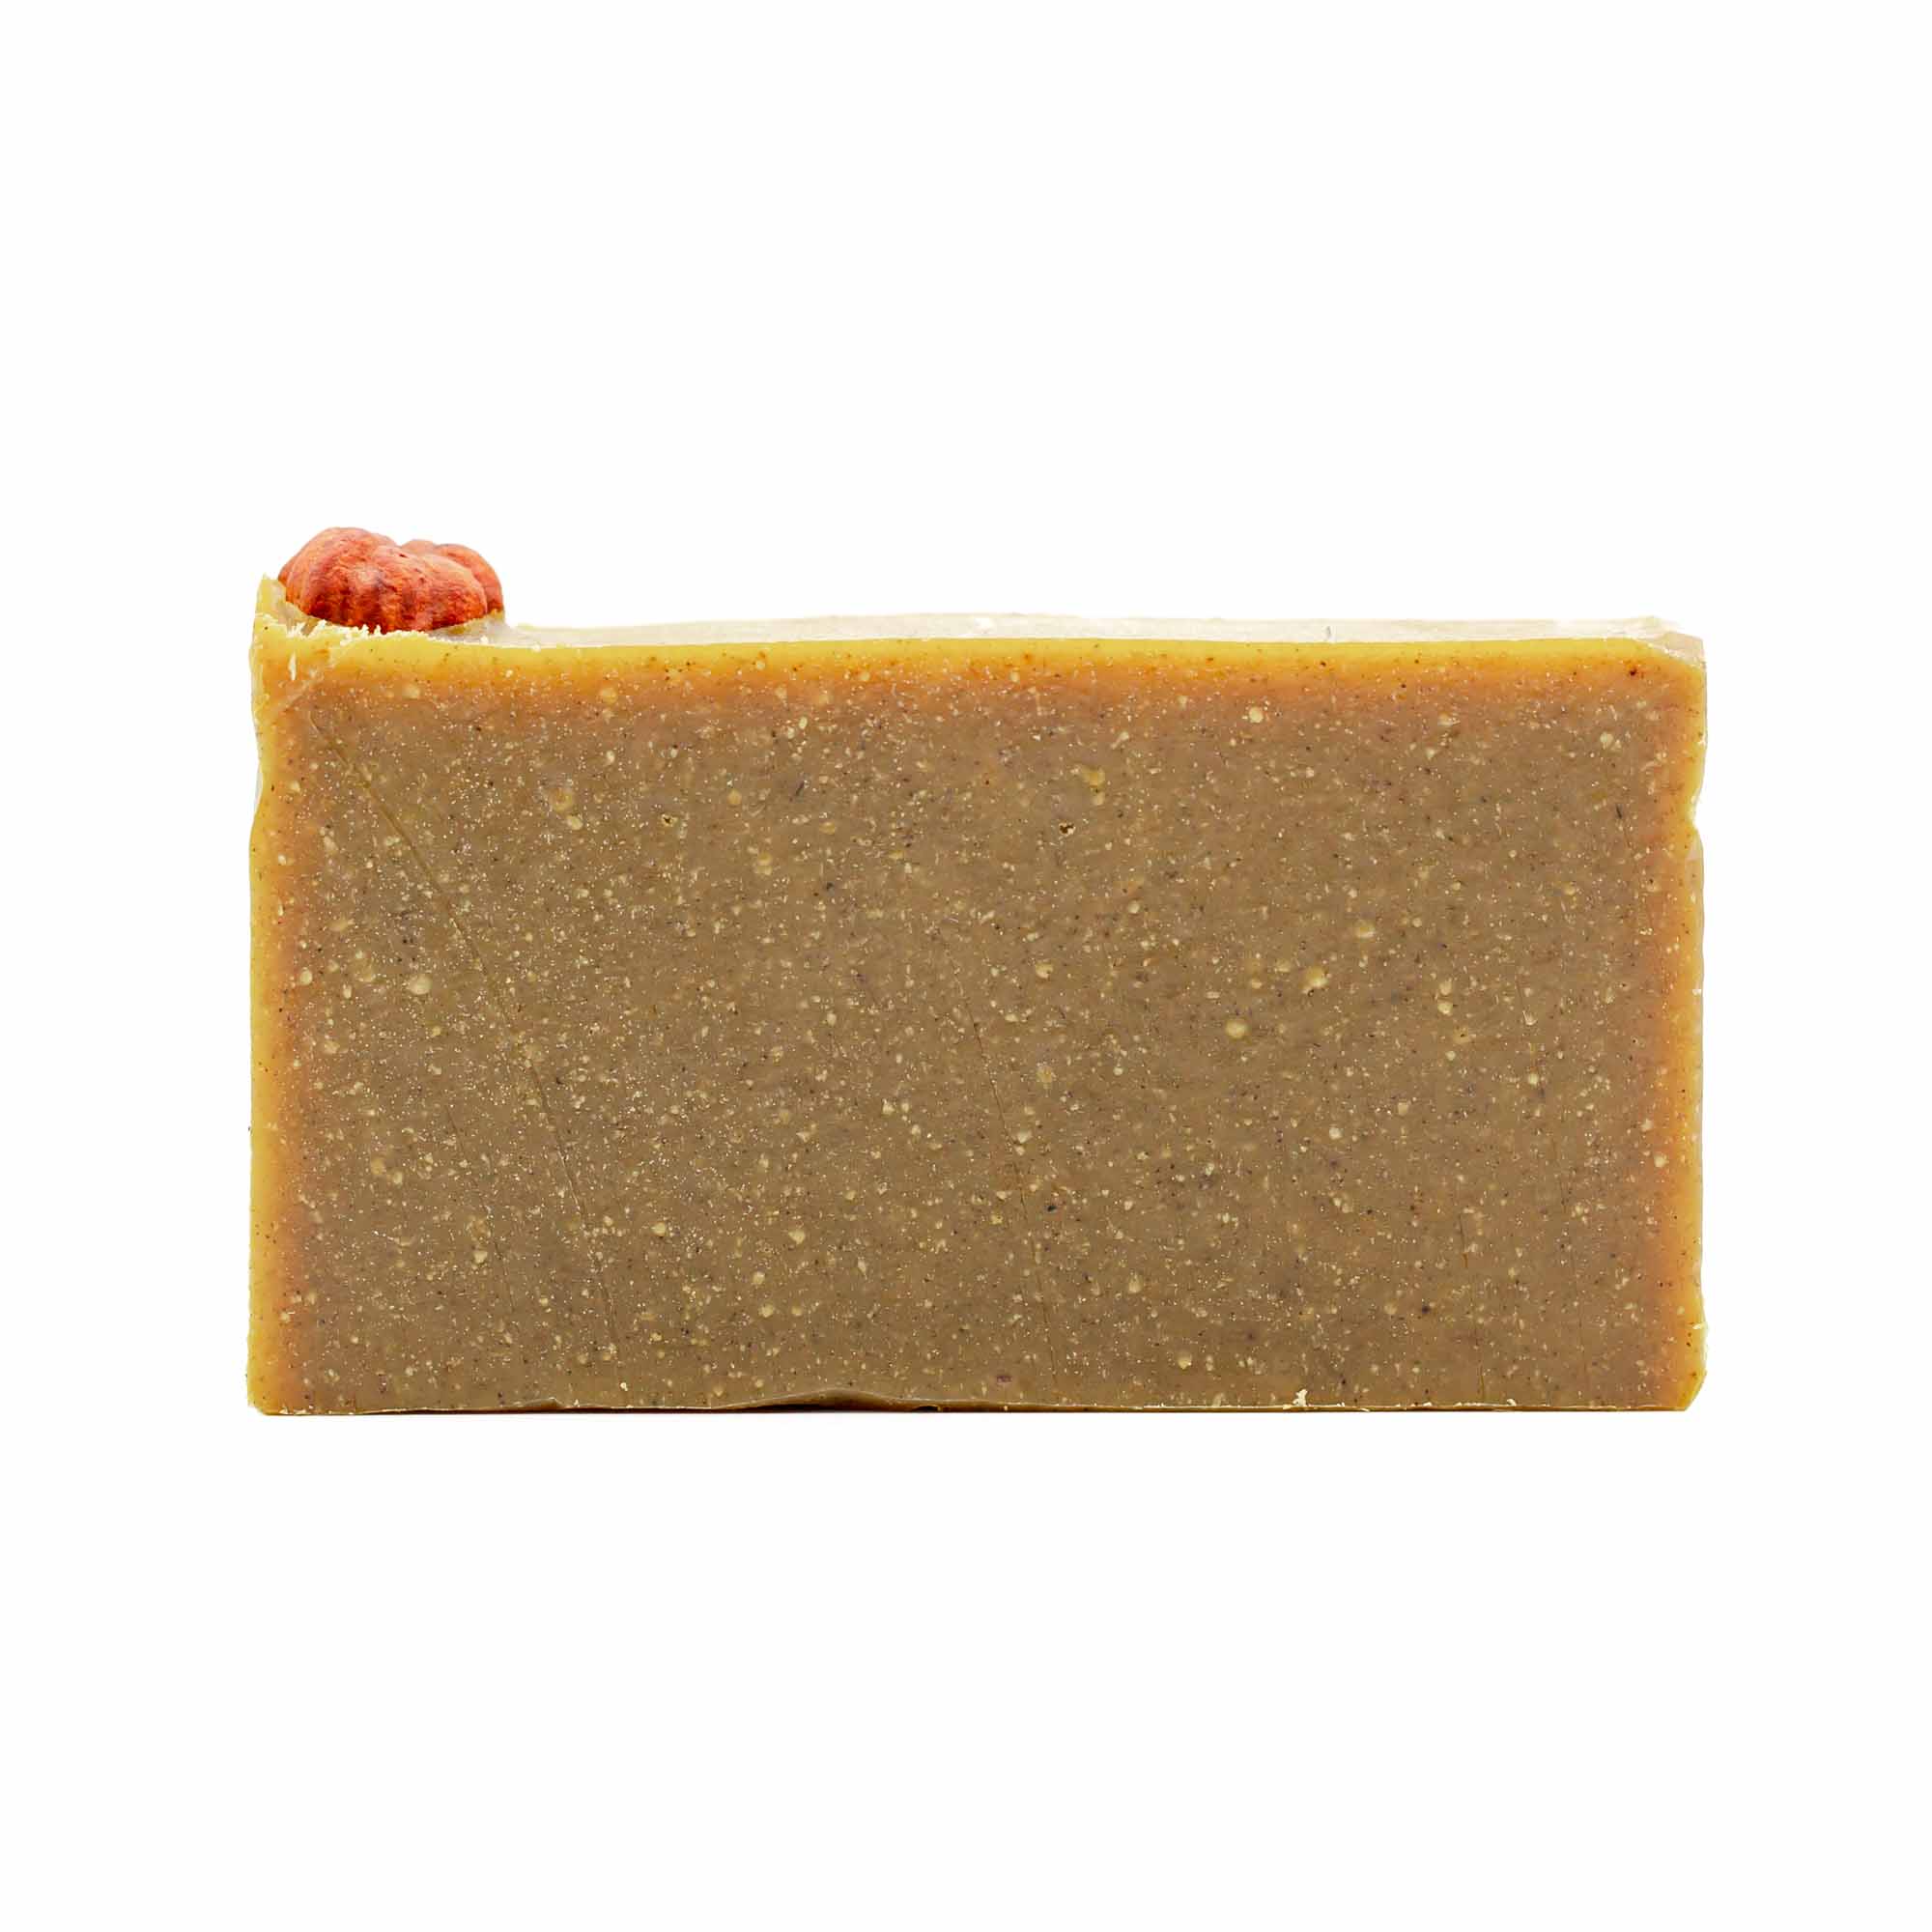 Welliver Goods - pumpkin spice bar soap - Mortise And Tenon